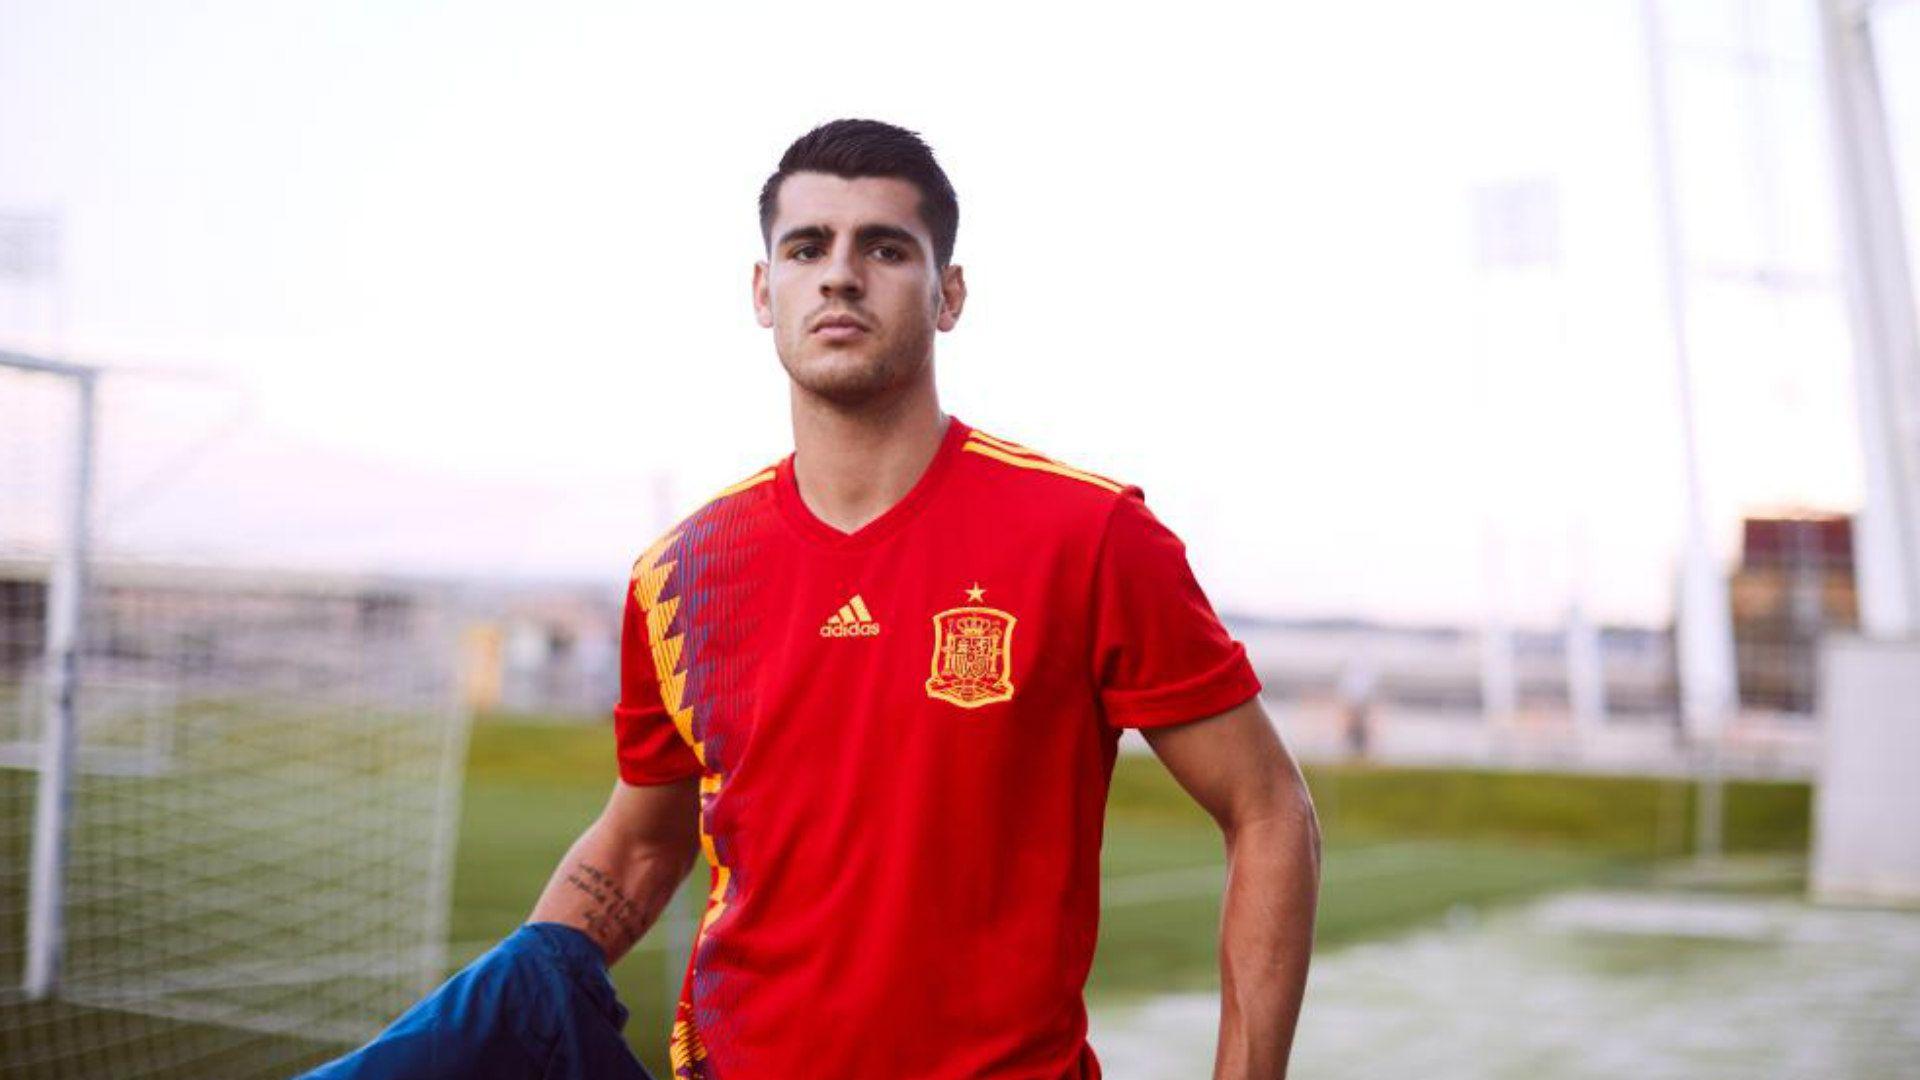 Spain World Cup 2018 kit: New retro Adidas design, controversy & all